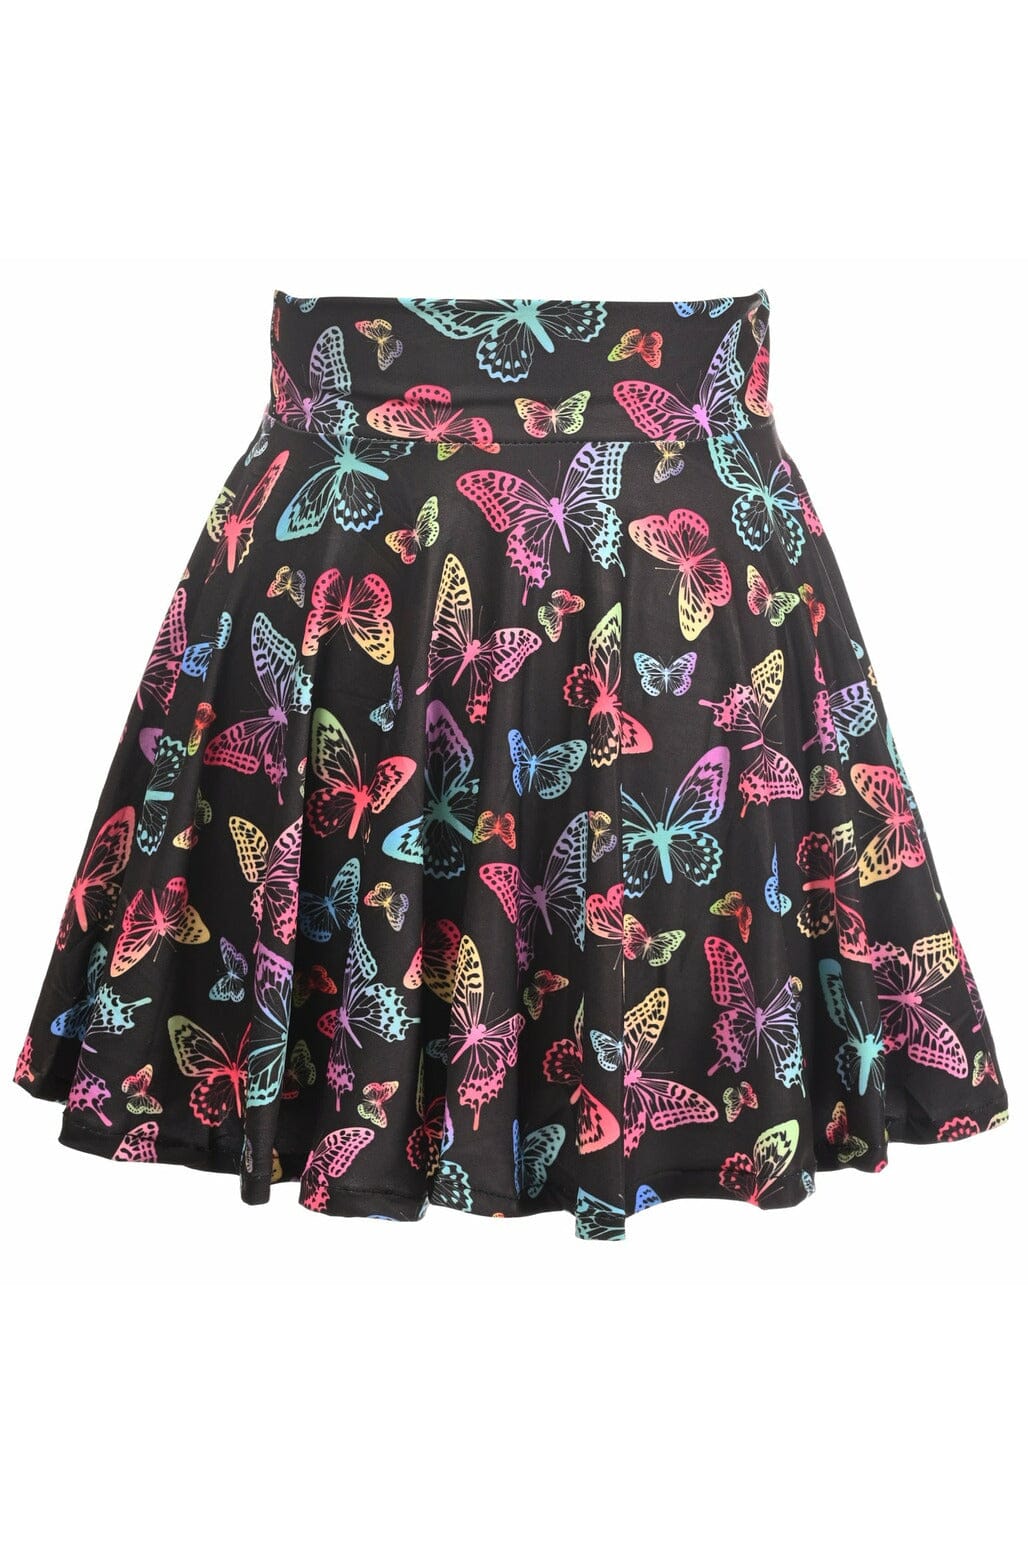 Butterfly Print Stretch Lycra Skirt-Costume Skirts-Daisy Corsets-Animal-XS-SEXYSHOES.COM